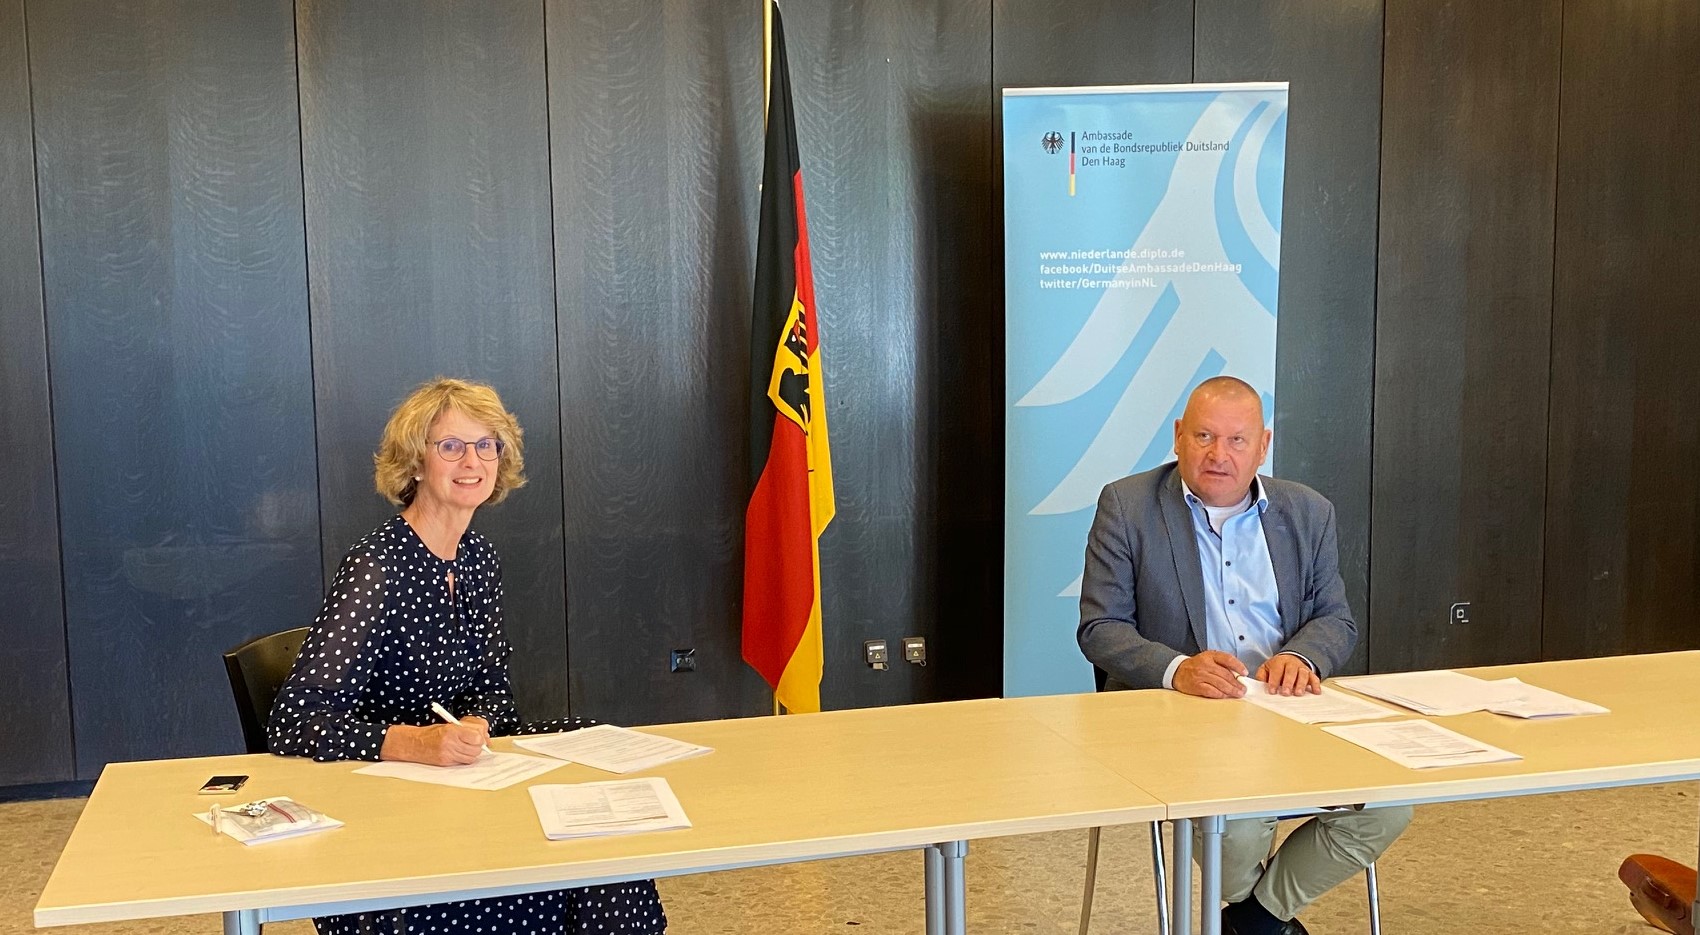 The Liberation Route Europe Foundation receives grant from the German Federal Government